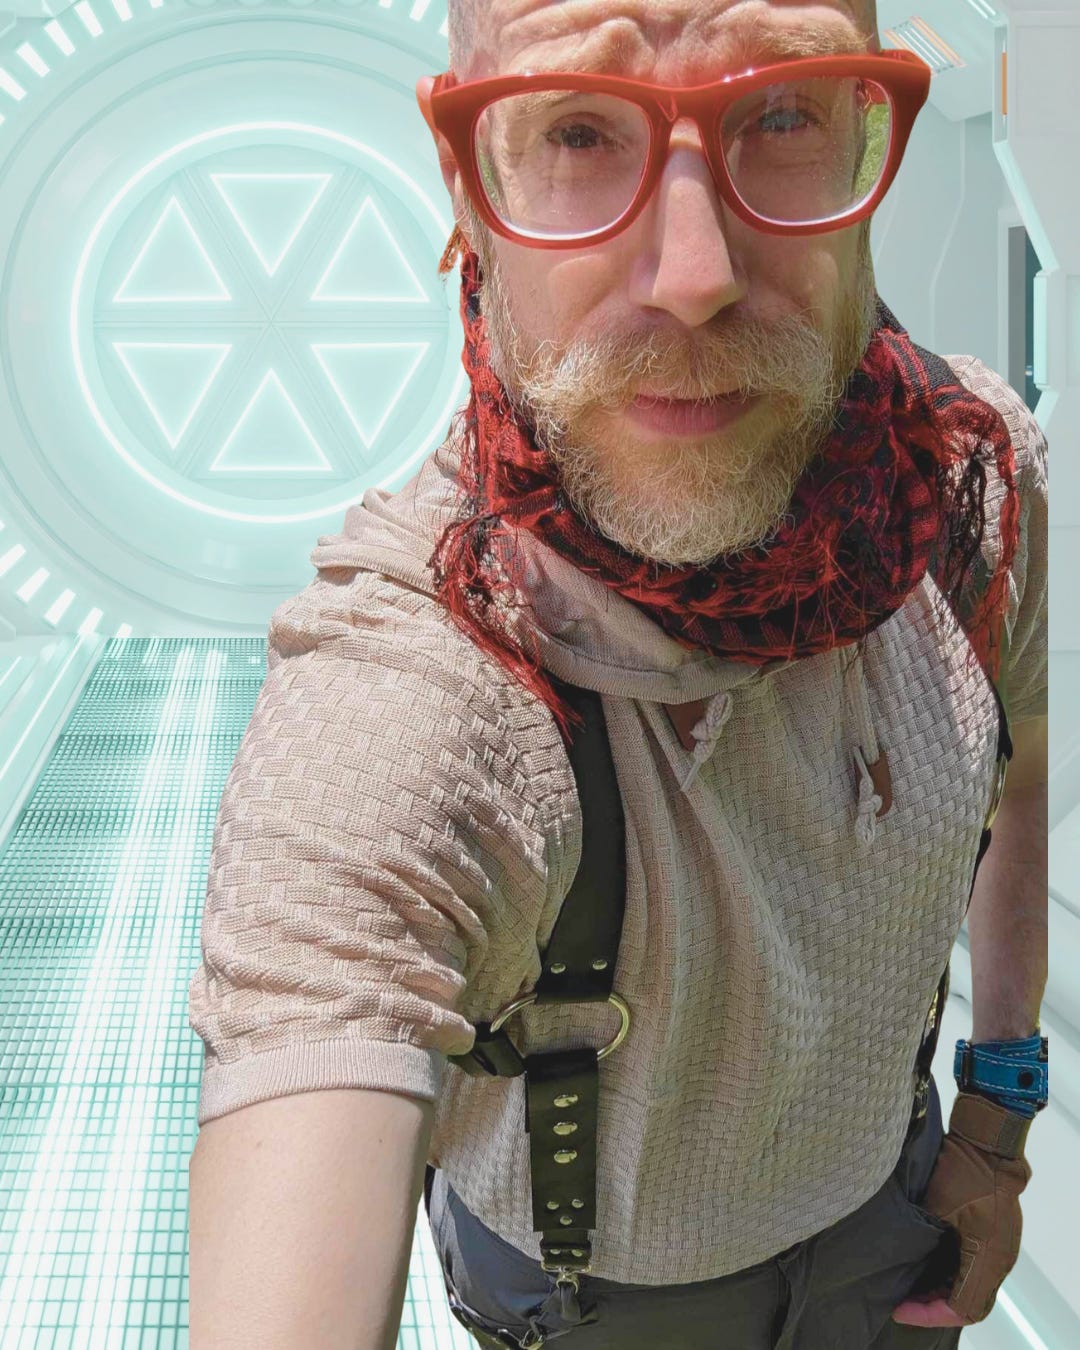 Pale-skinned man with bald head and gingery beard, wearing red glasses, an off-white shirt, a red scarf, and a leather holster, standing in what appears to be a starship hallway